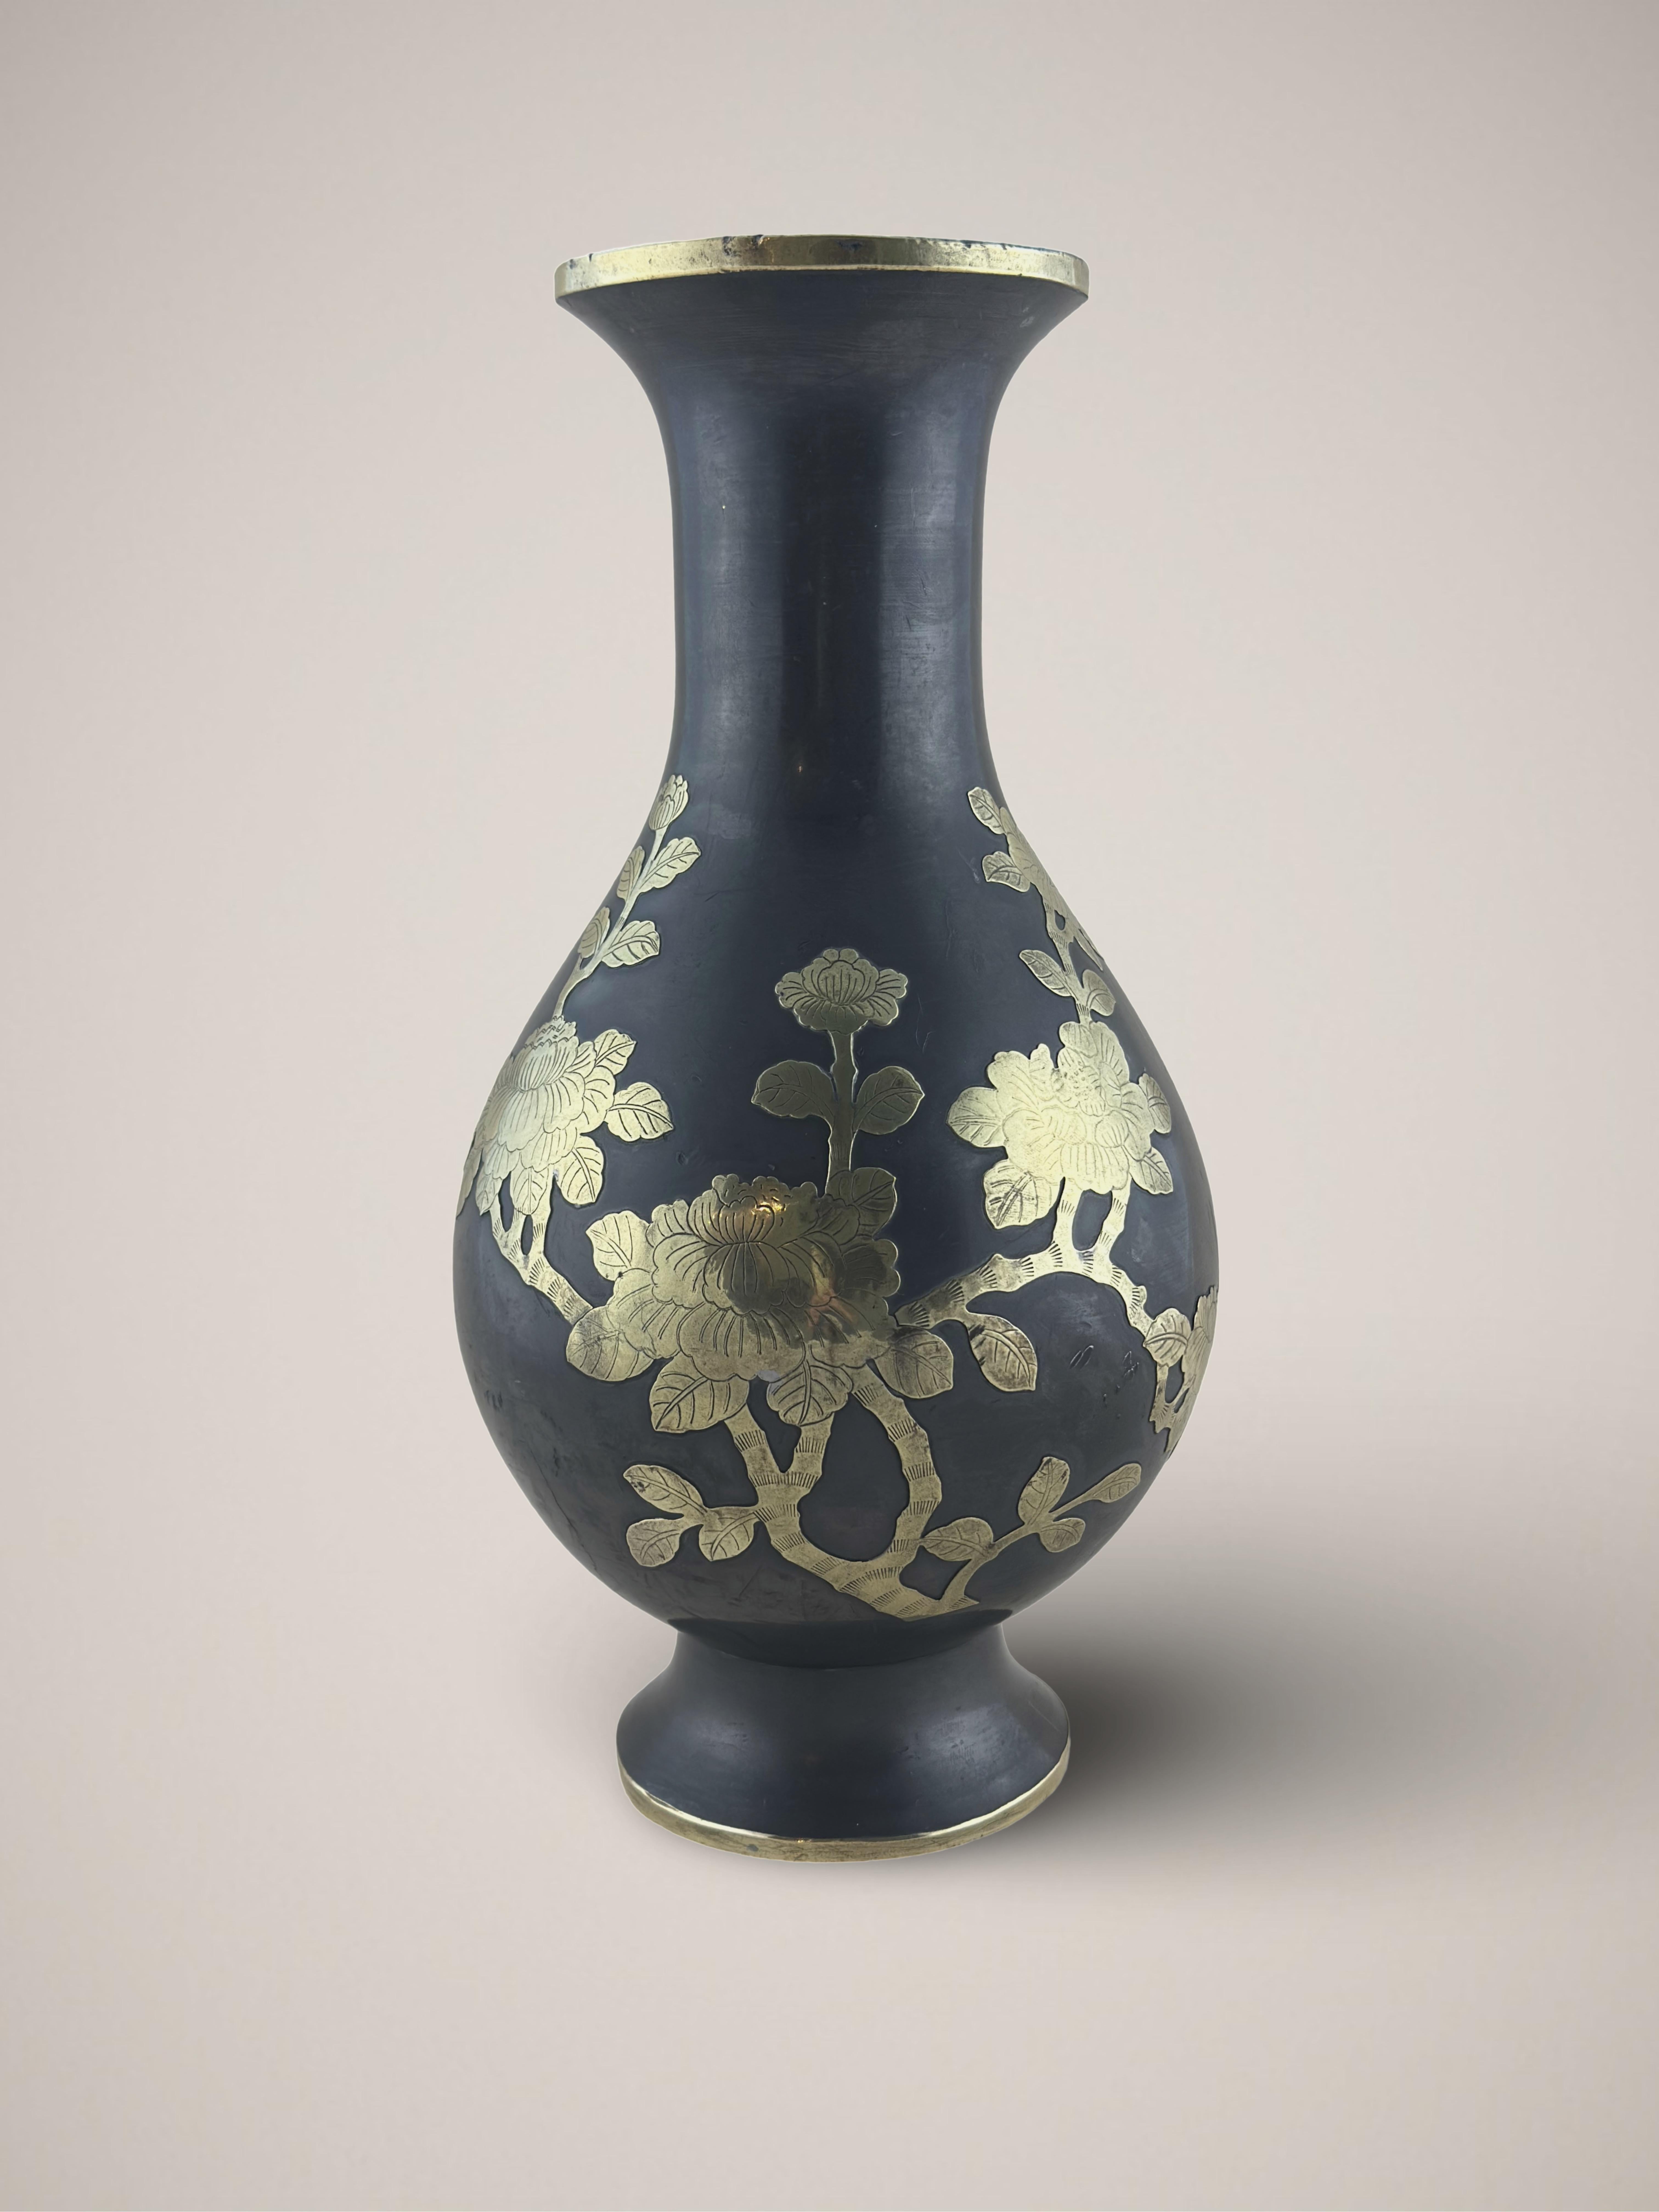 A vintage pewter and brass metal vase. Created during the mid-20th century, around the 1960s, in China.

The vase is adorned with a figural scene of a tree peony in full bloom. Depicted with paper thin brass sheet, meticulously cut and detailed with